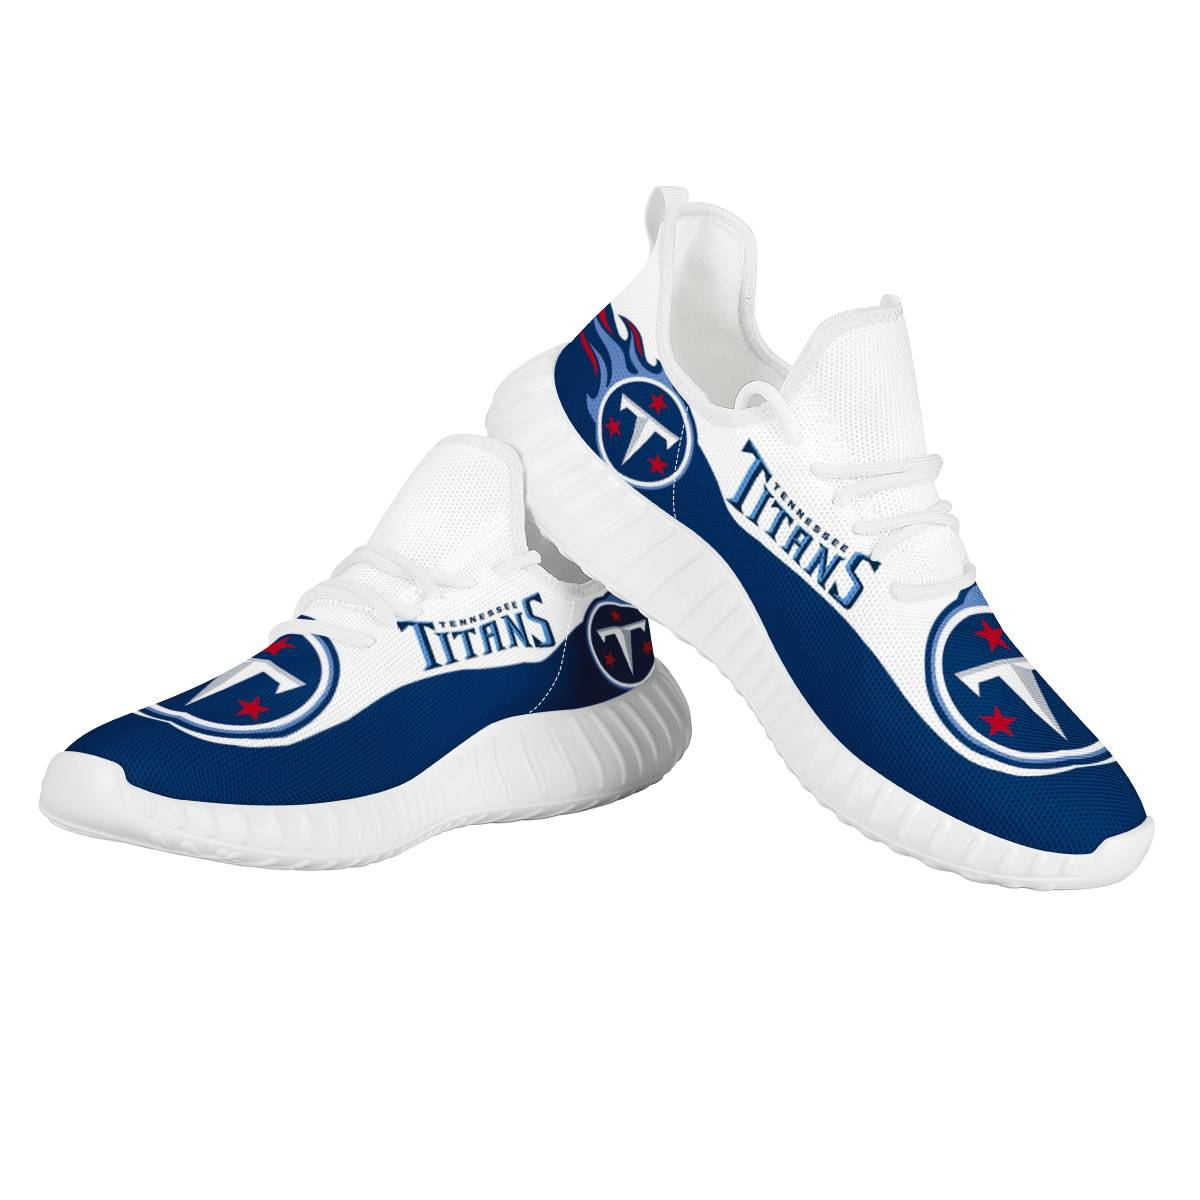 Men's NFL Tennessee Titans Mesh Knit Sneakers/Shoes 004